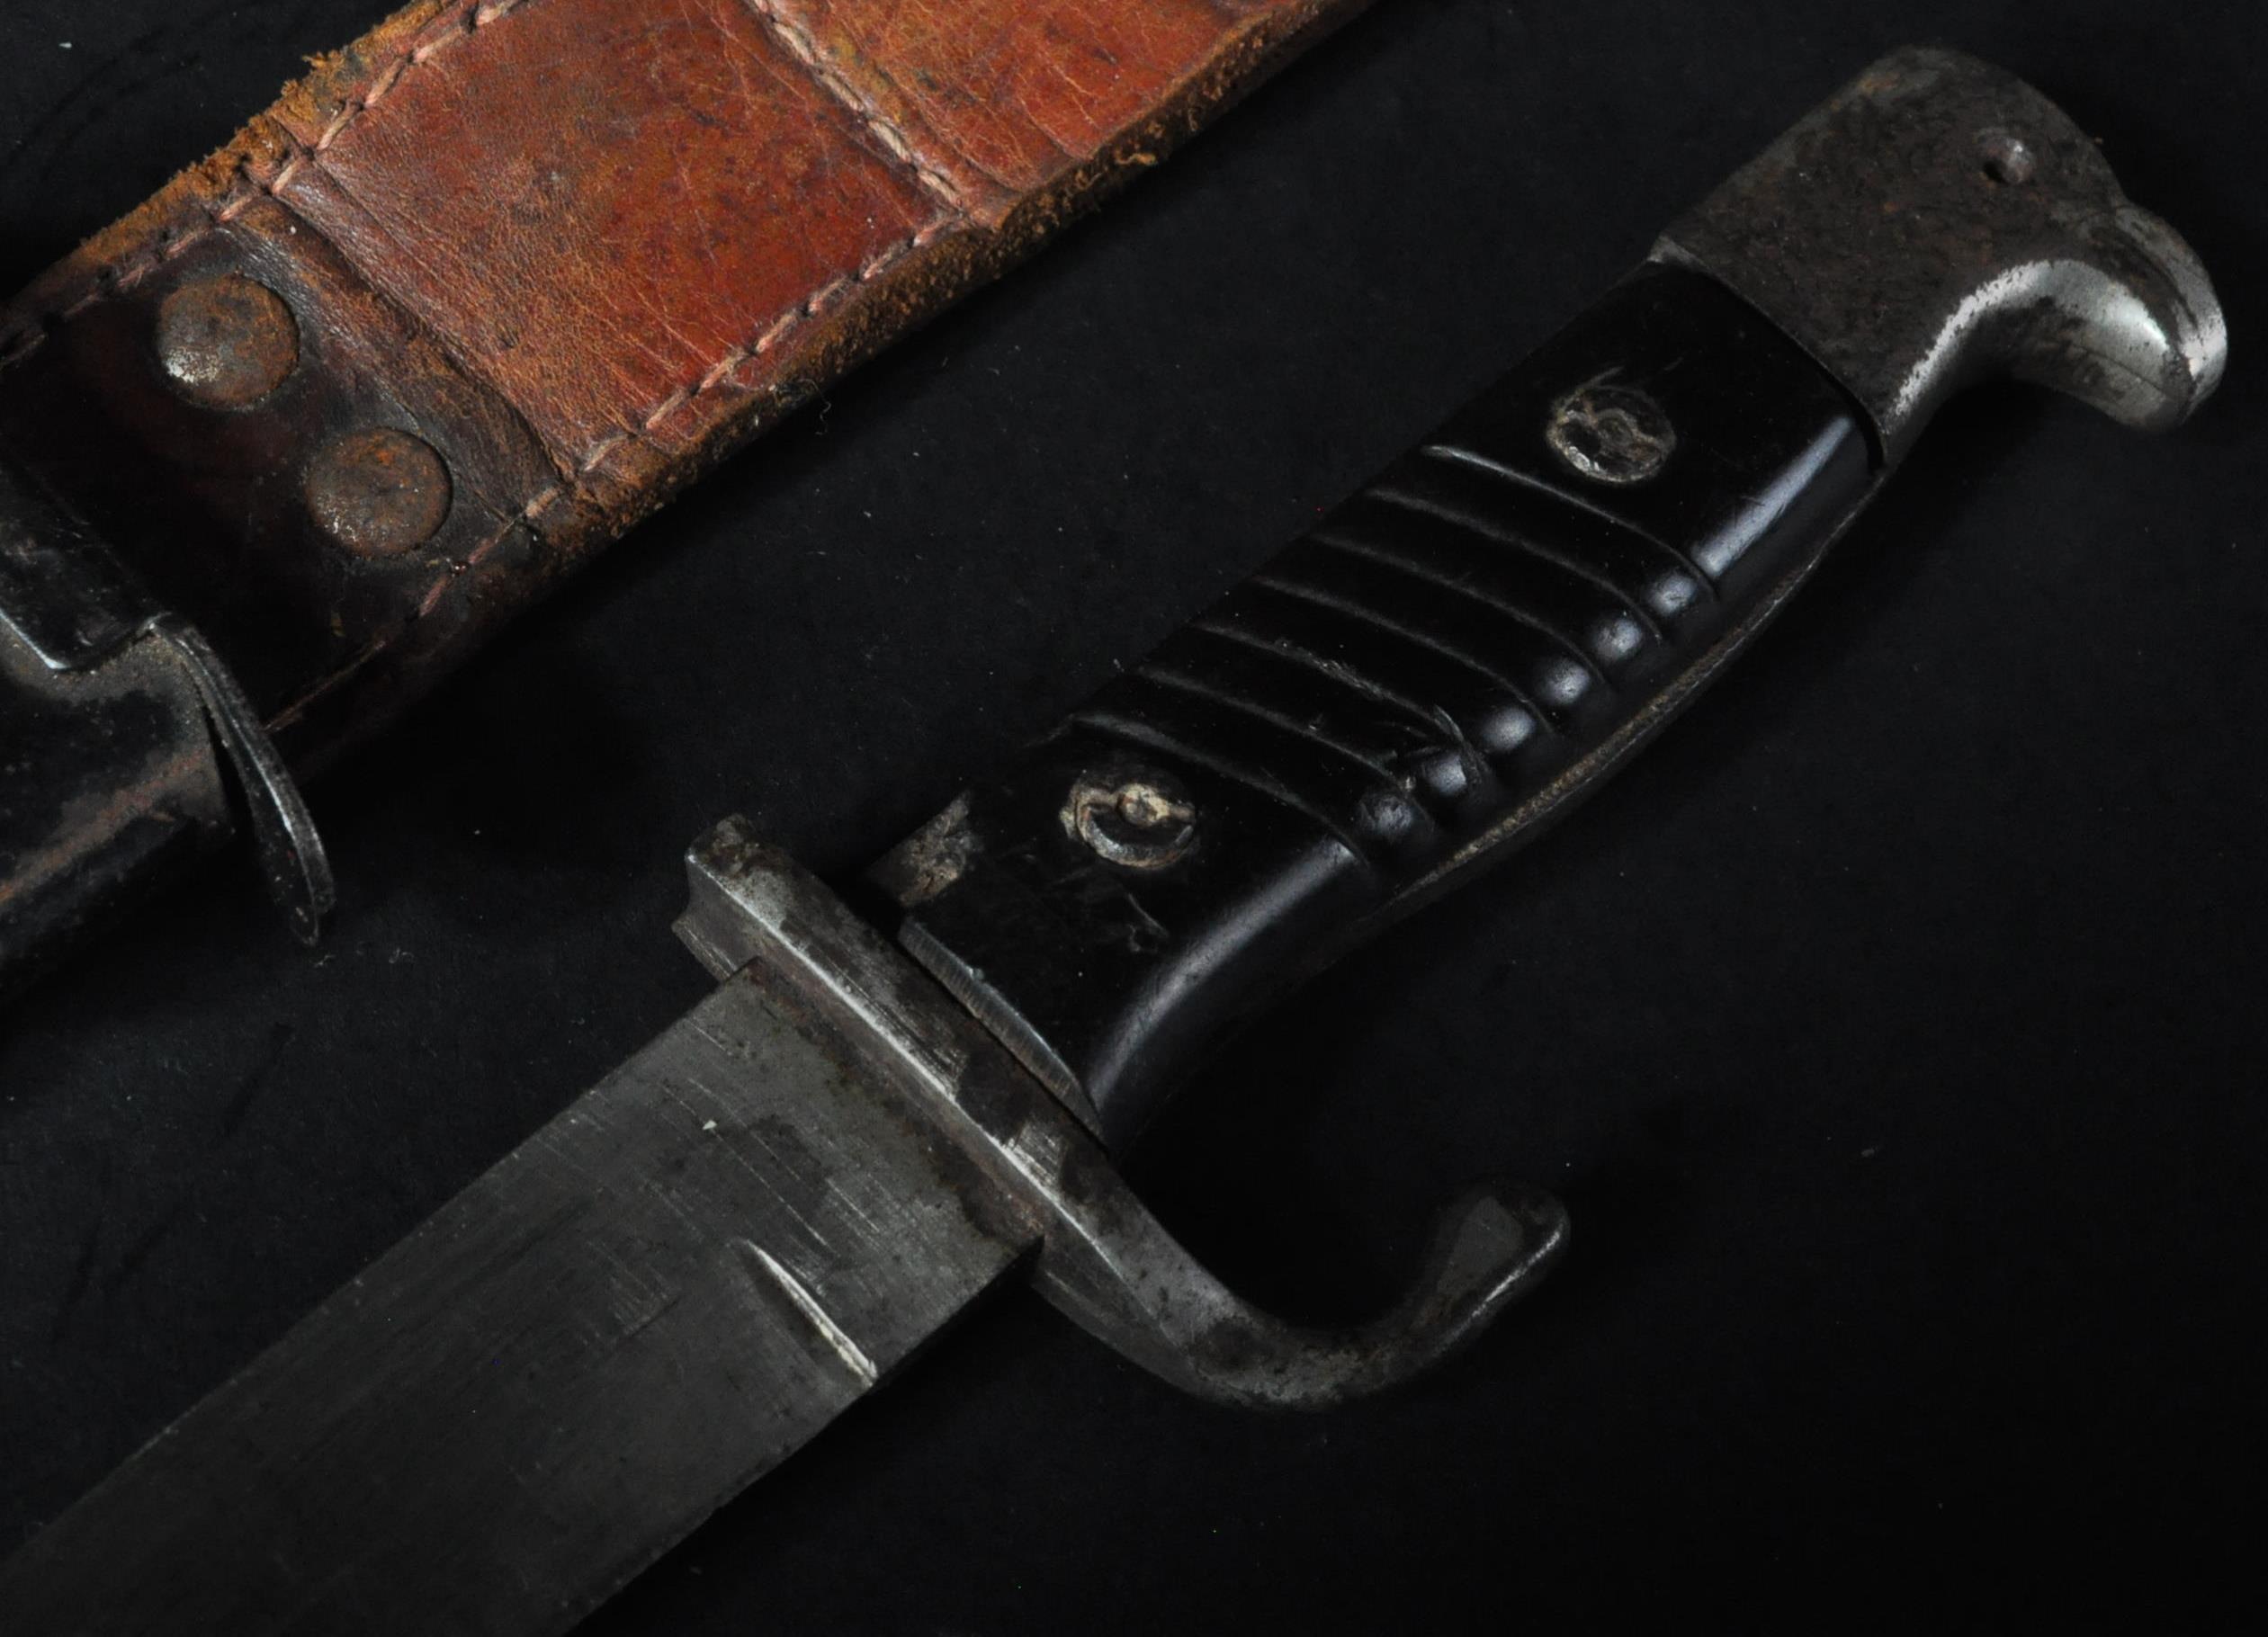 WWII SECOND WORLD WAR PERIOD FIGHTING KNIFE - Image 3 of 6